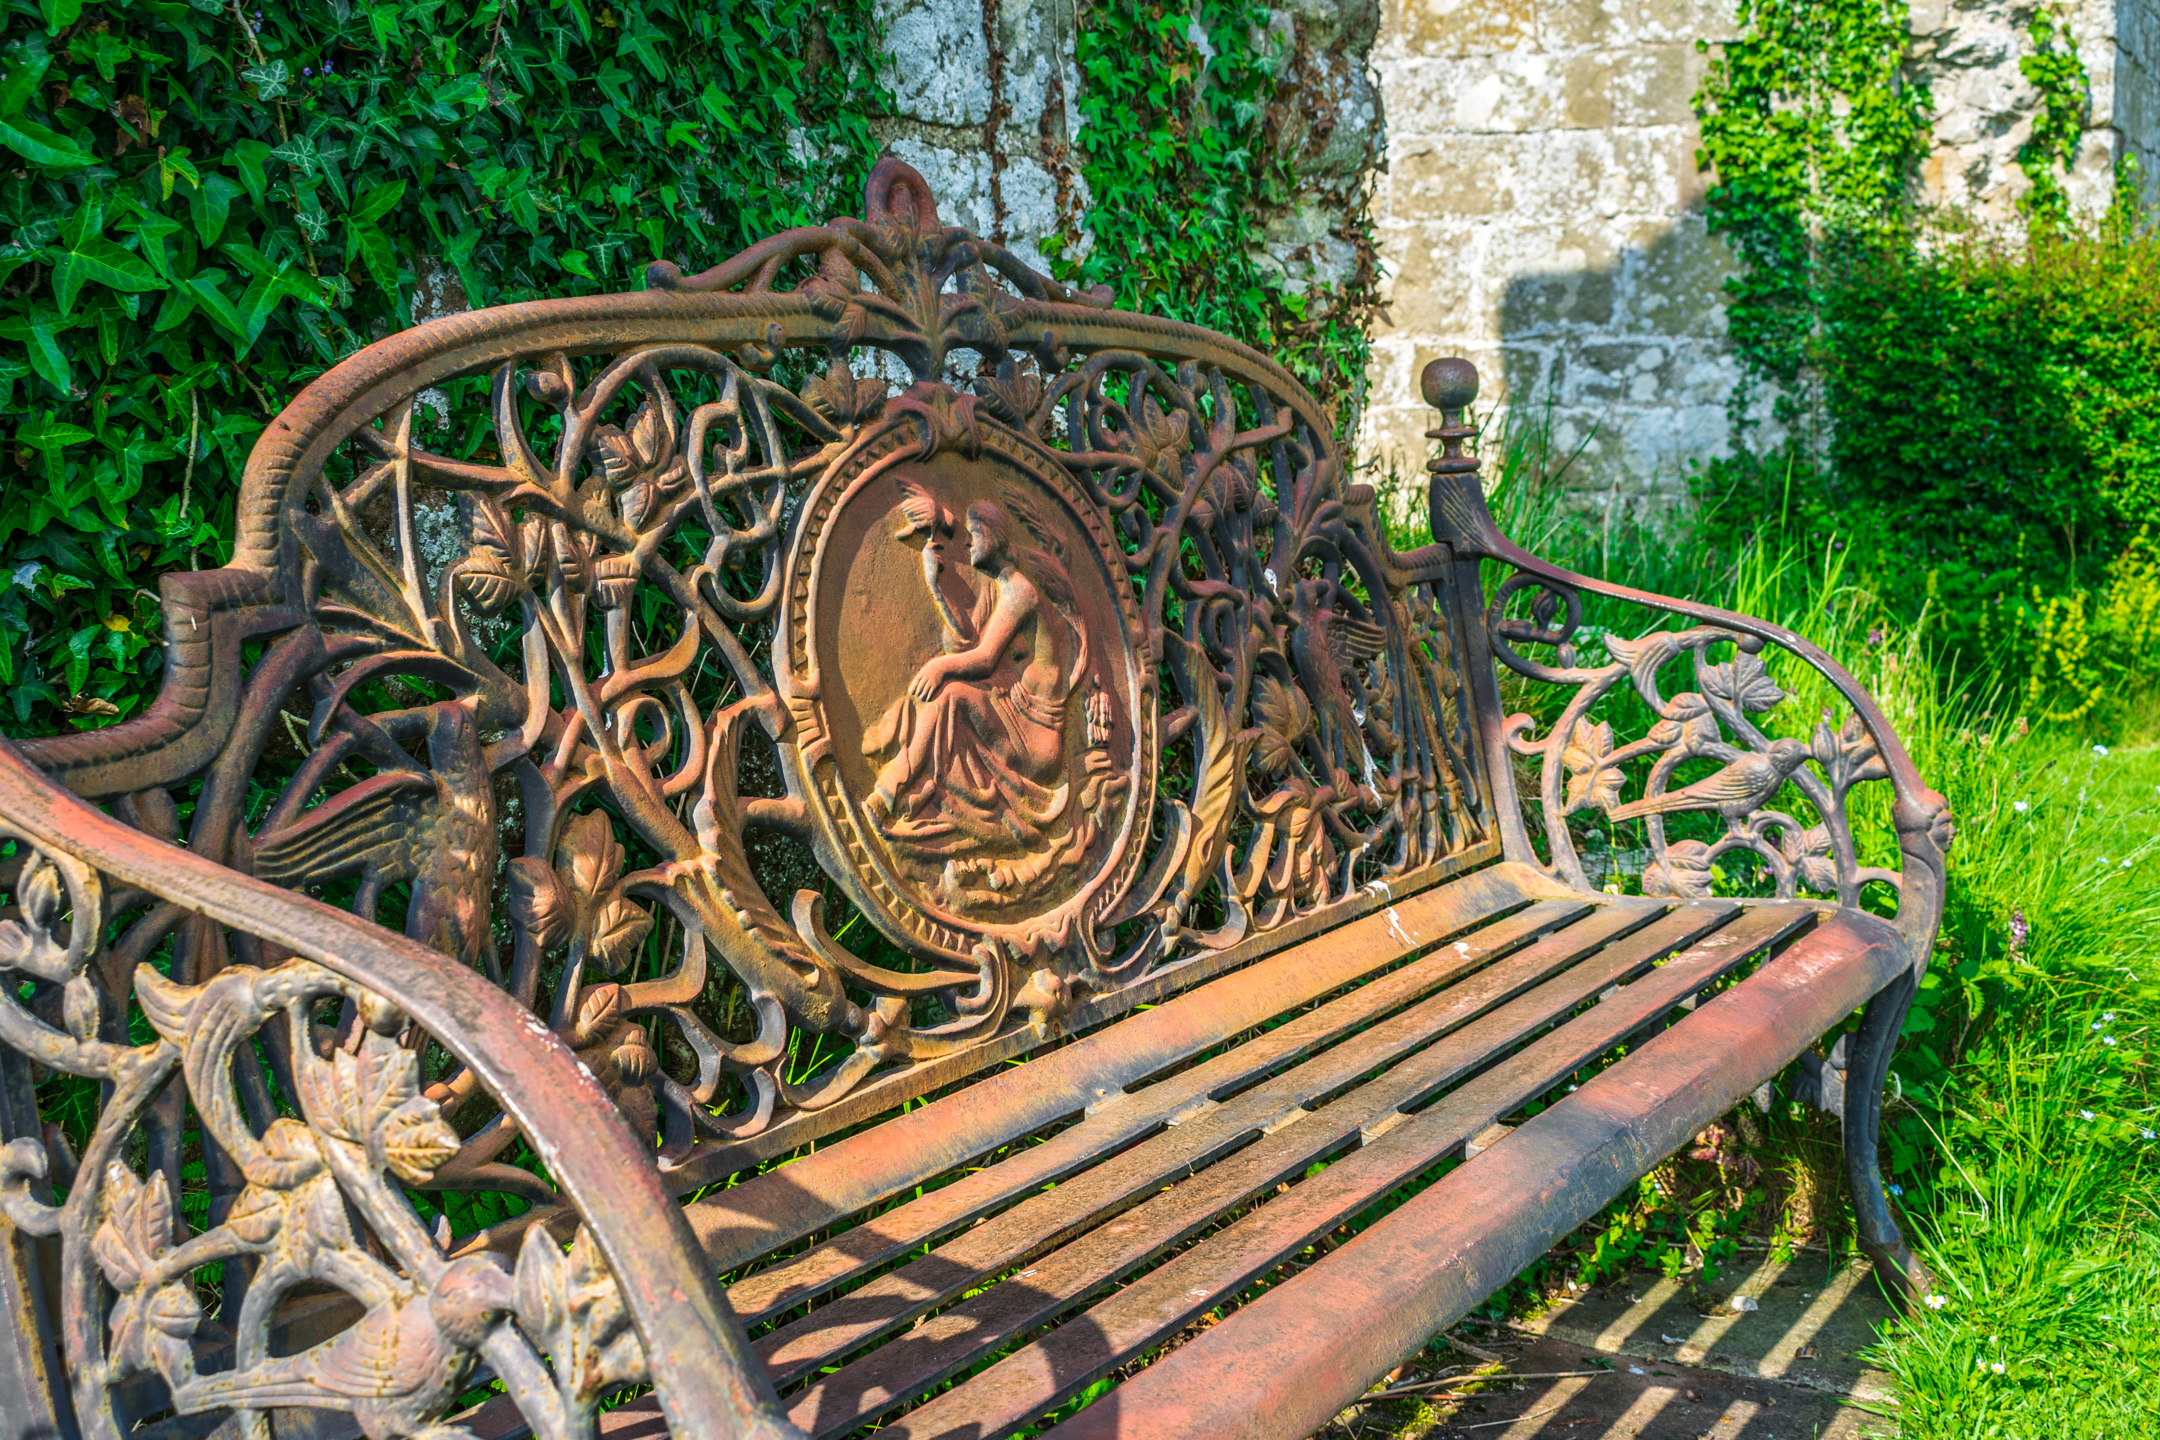 A very ornate wrought iron bench photographed in the grounds of Jervaulx Abbey in North Yorkshire.